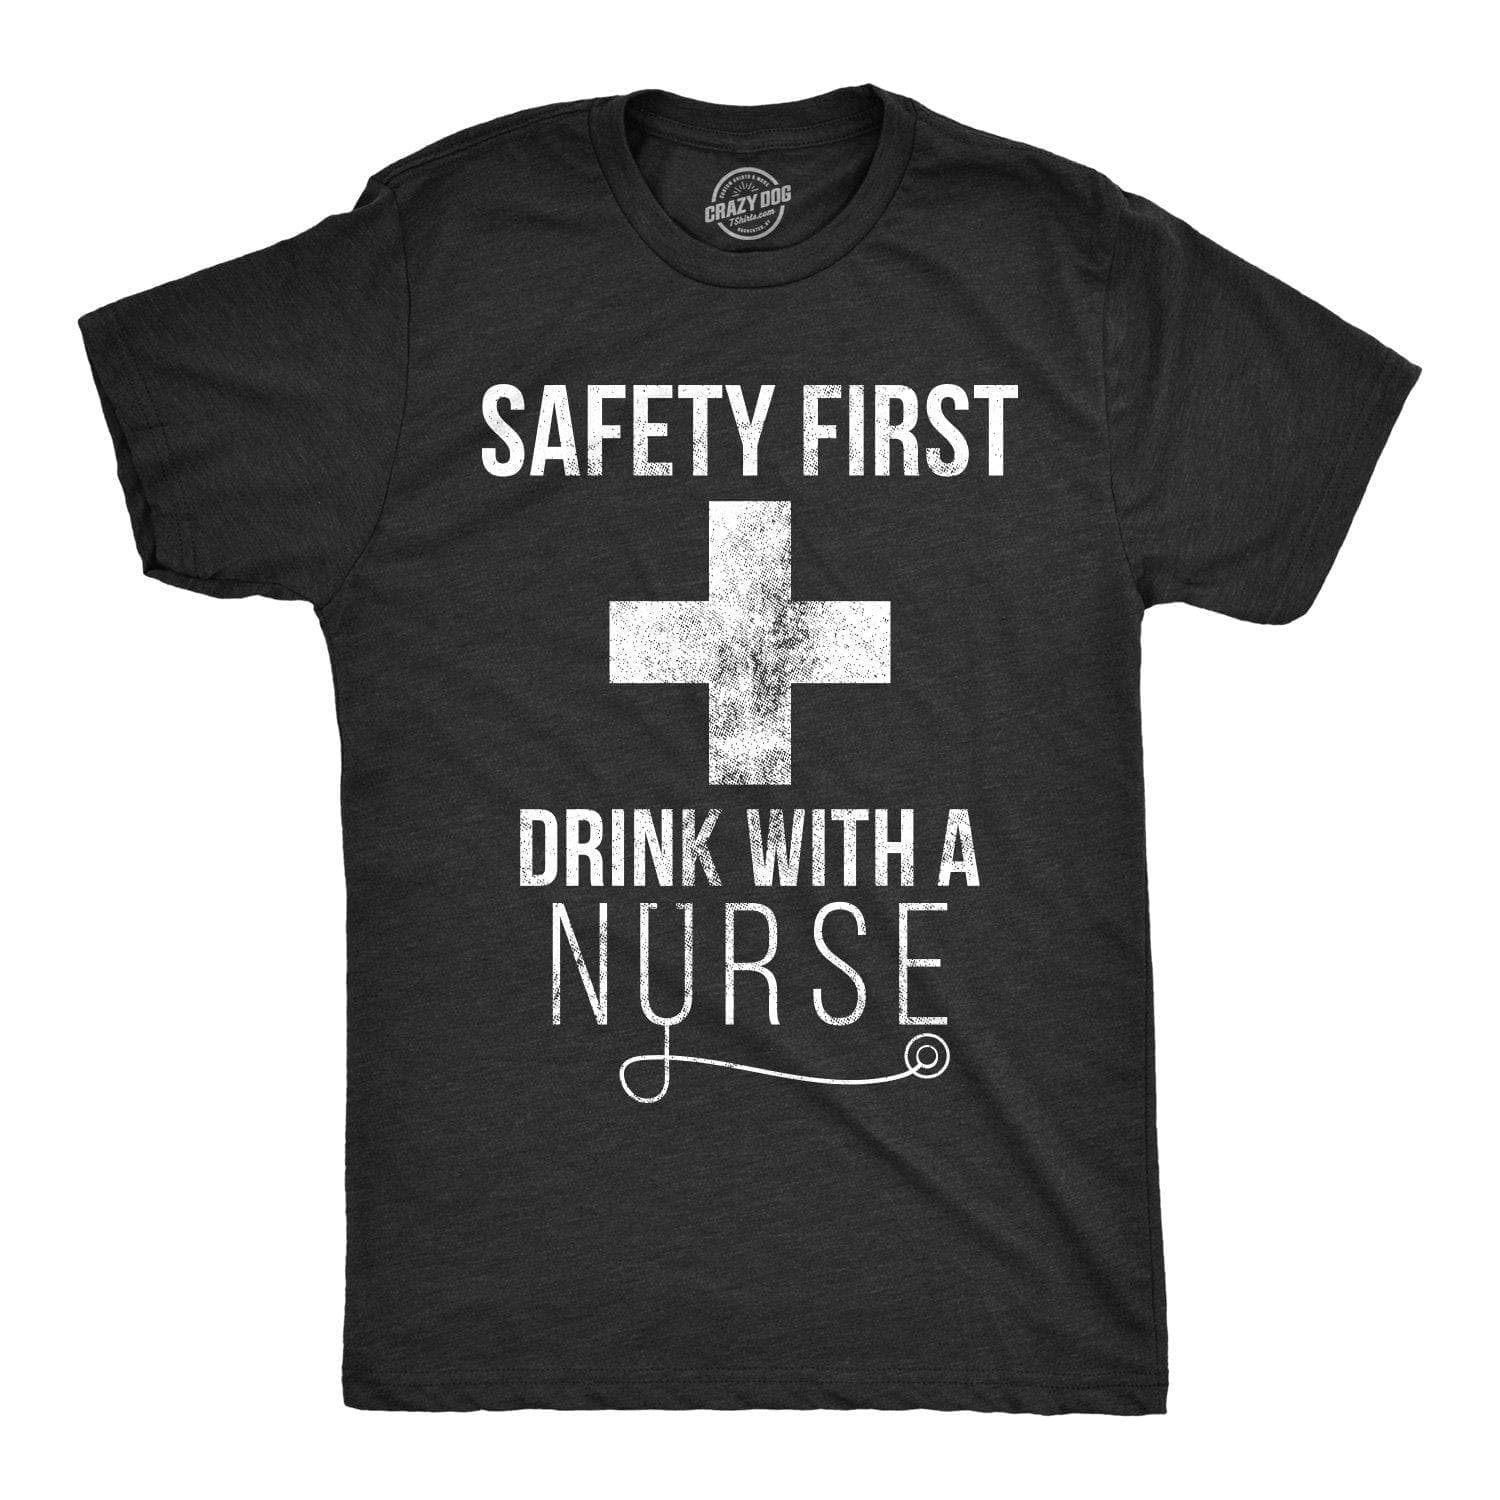 Safety First Drink With A Nurse Men's Tshirt  -  Crazy Dog T-Shirts